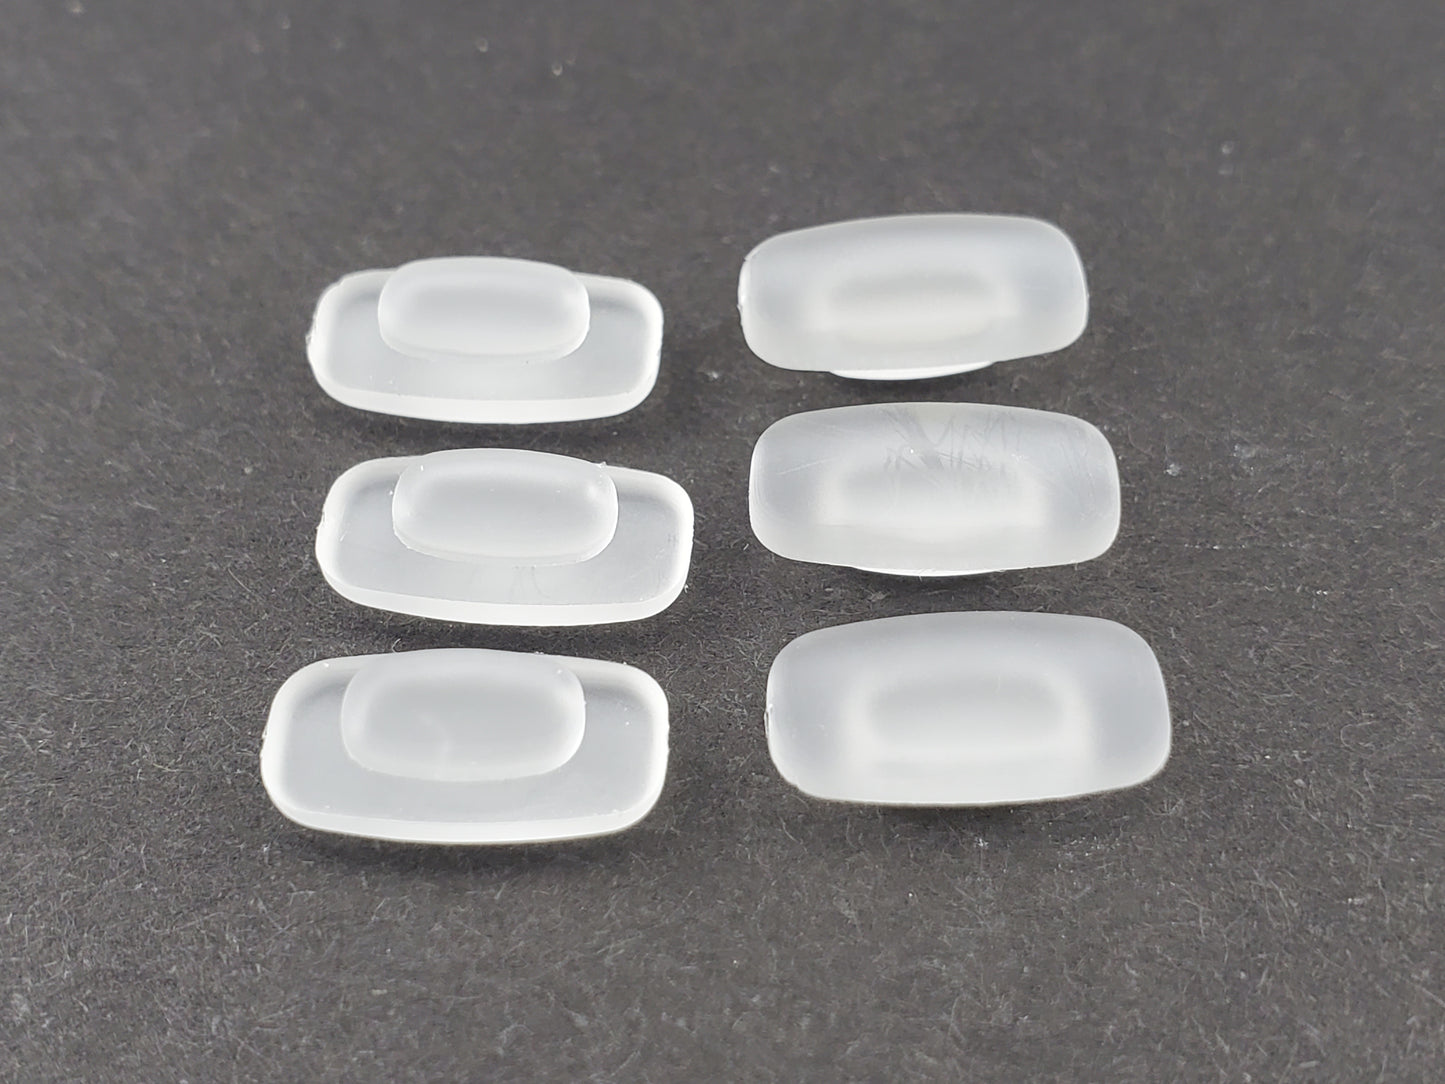 LMP Optical Supply Frosted 13mm Universal Rectangular Push-in Nose Pads Eyeglasses & Sunglasses